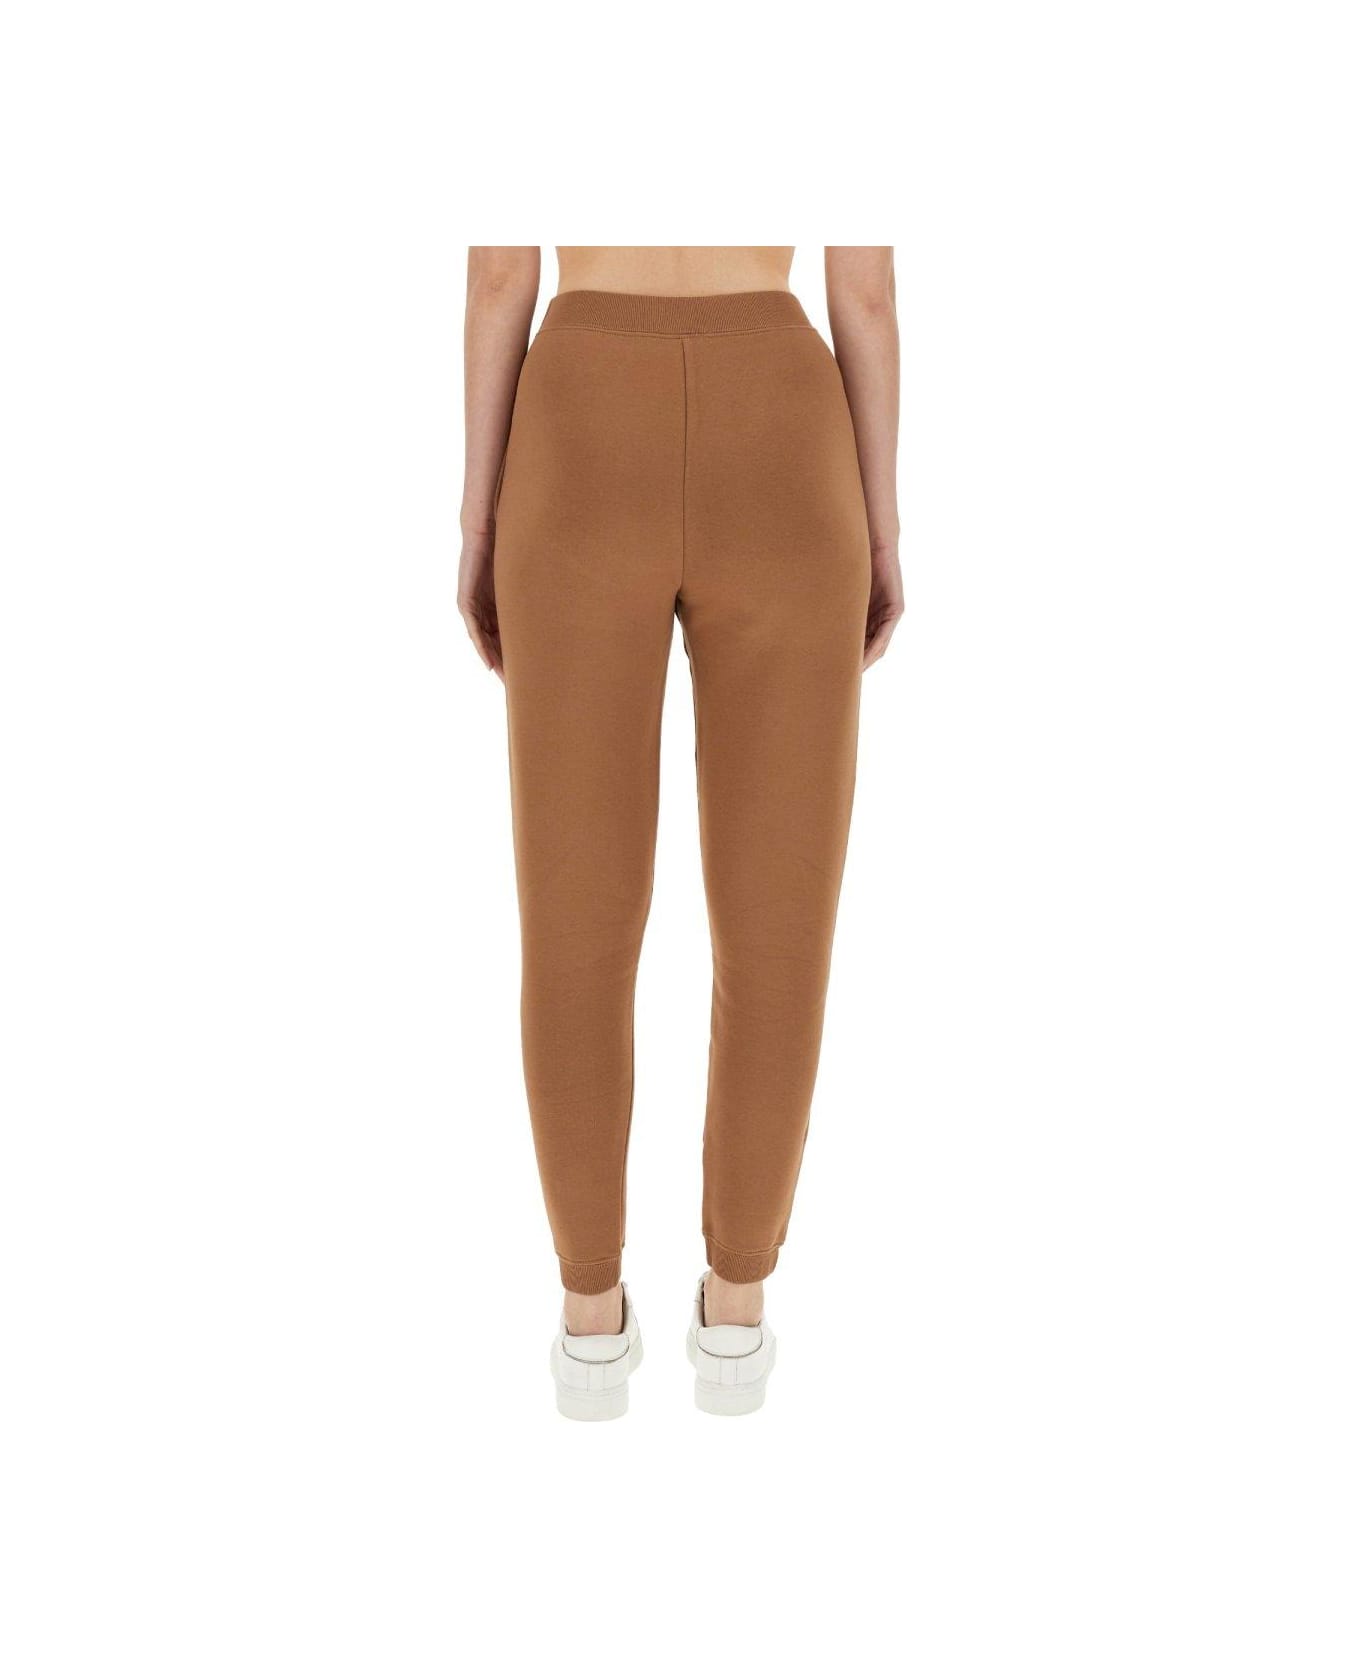 'S Max Mara Logo Embroidered Jogging Trousers - CAMEL